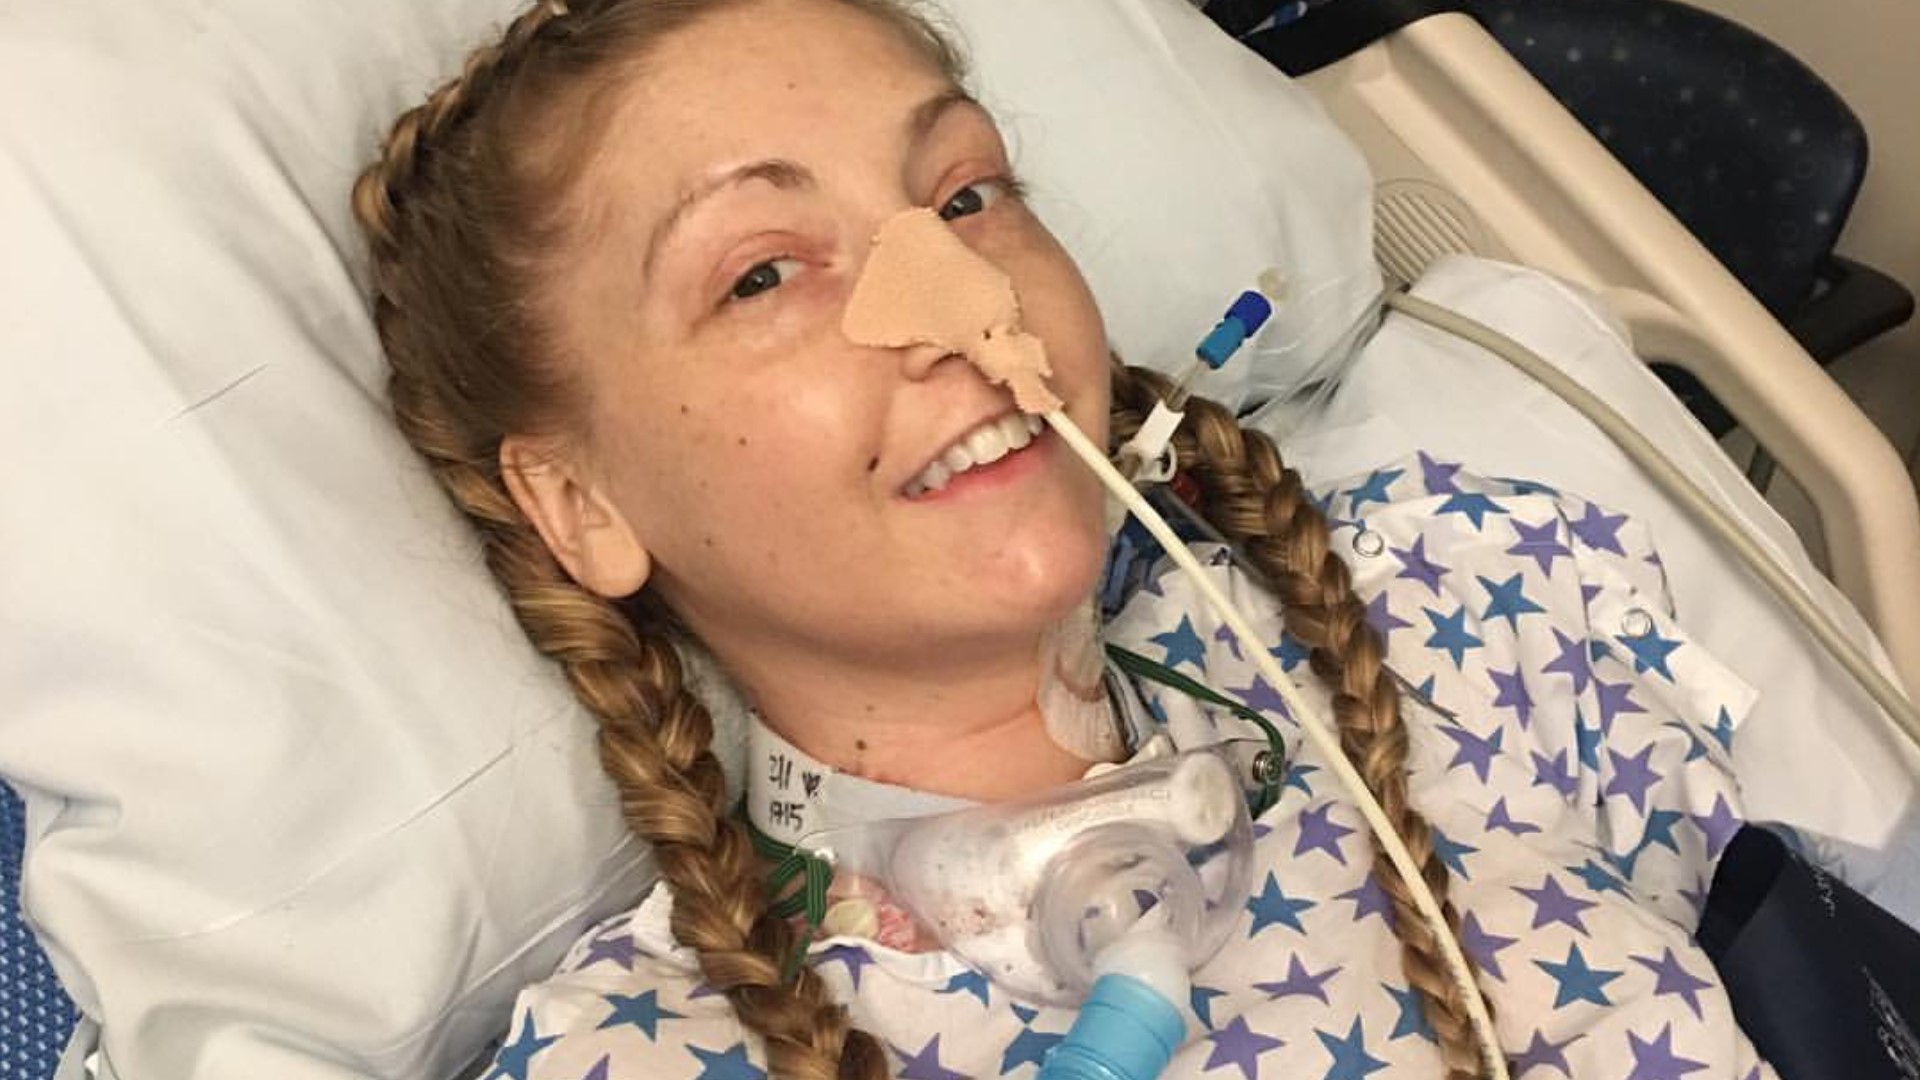 Whitney Messier, 33, of Stetson has been battling cystic fibrosis (a genetic, degenerative lung disease) from birth. She wants to share her story to inspire others.